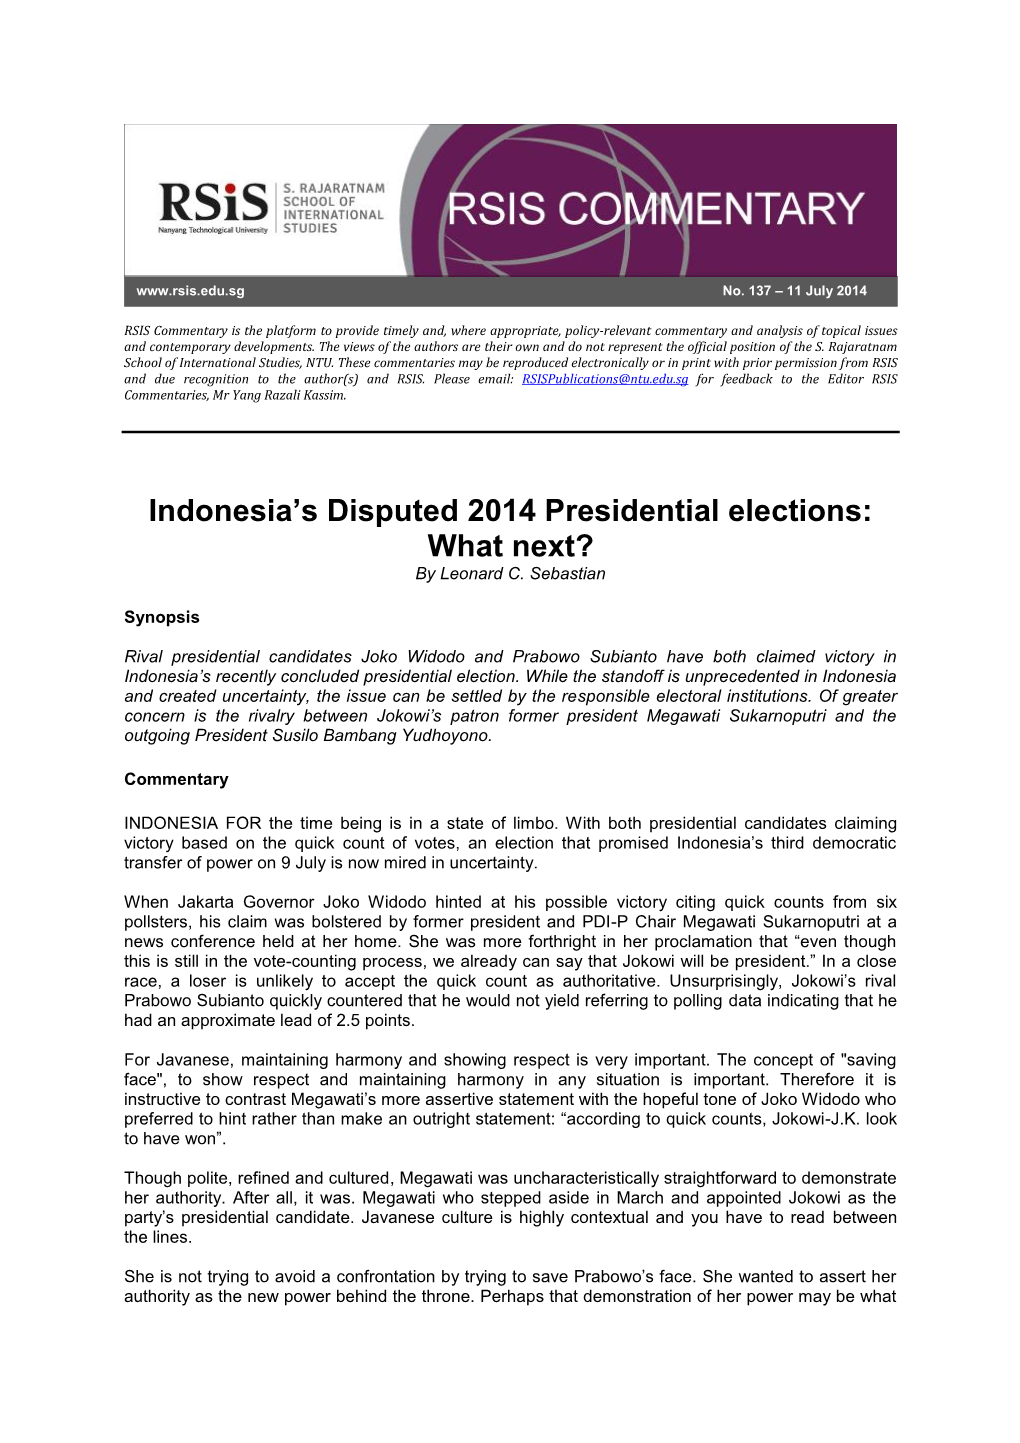 Indonesia's Disputed 2014 Presidential Elections